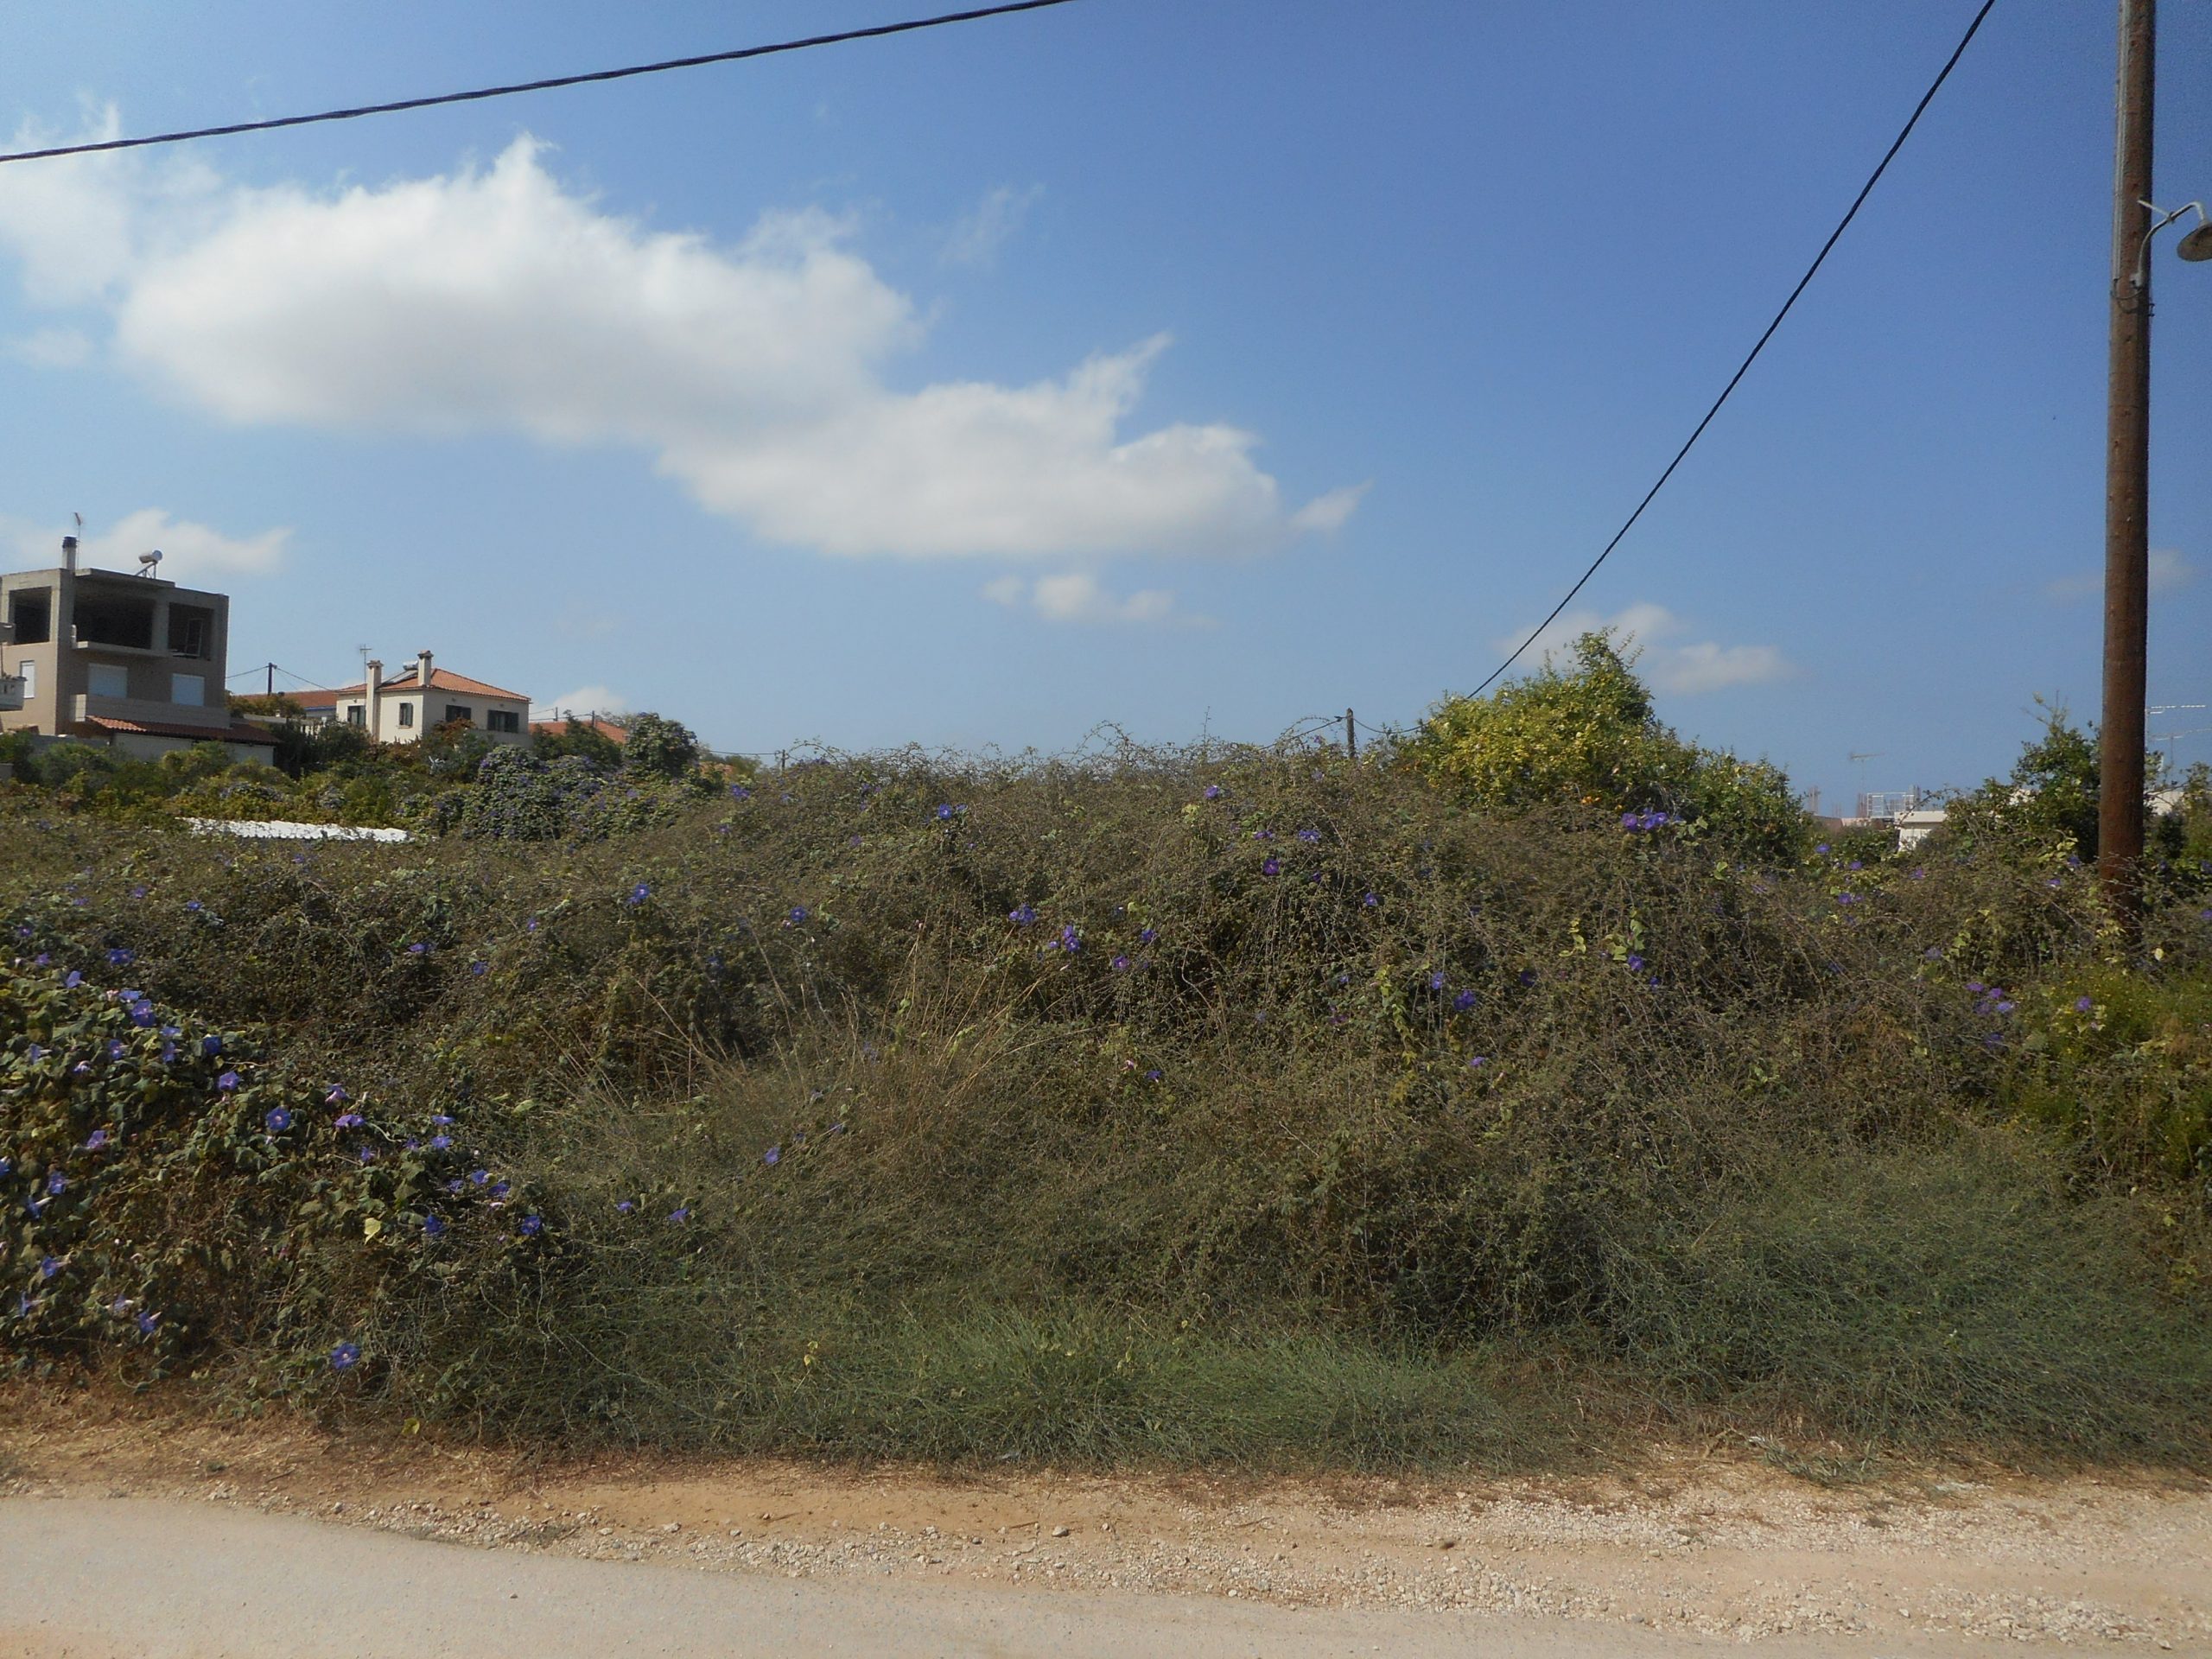 Corner plot of 560 sq.m. for sale in Chania-Varypetro, builds 200 sq.m. for a house.